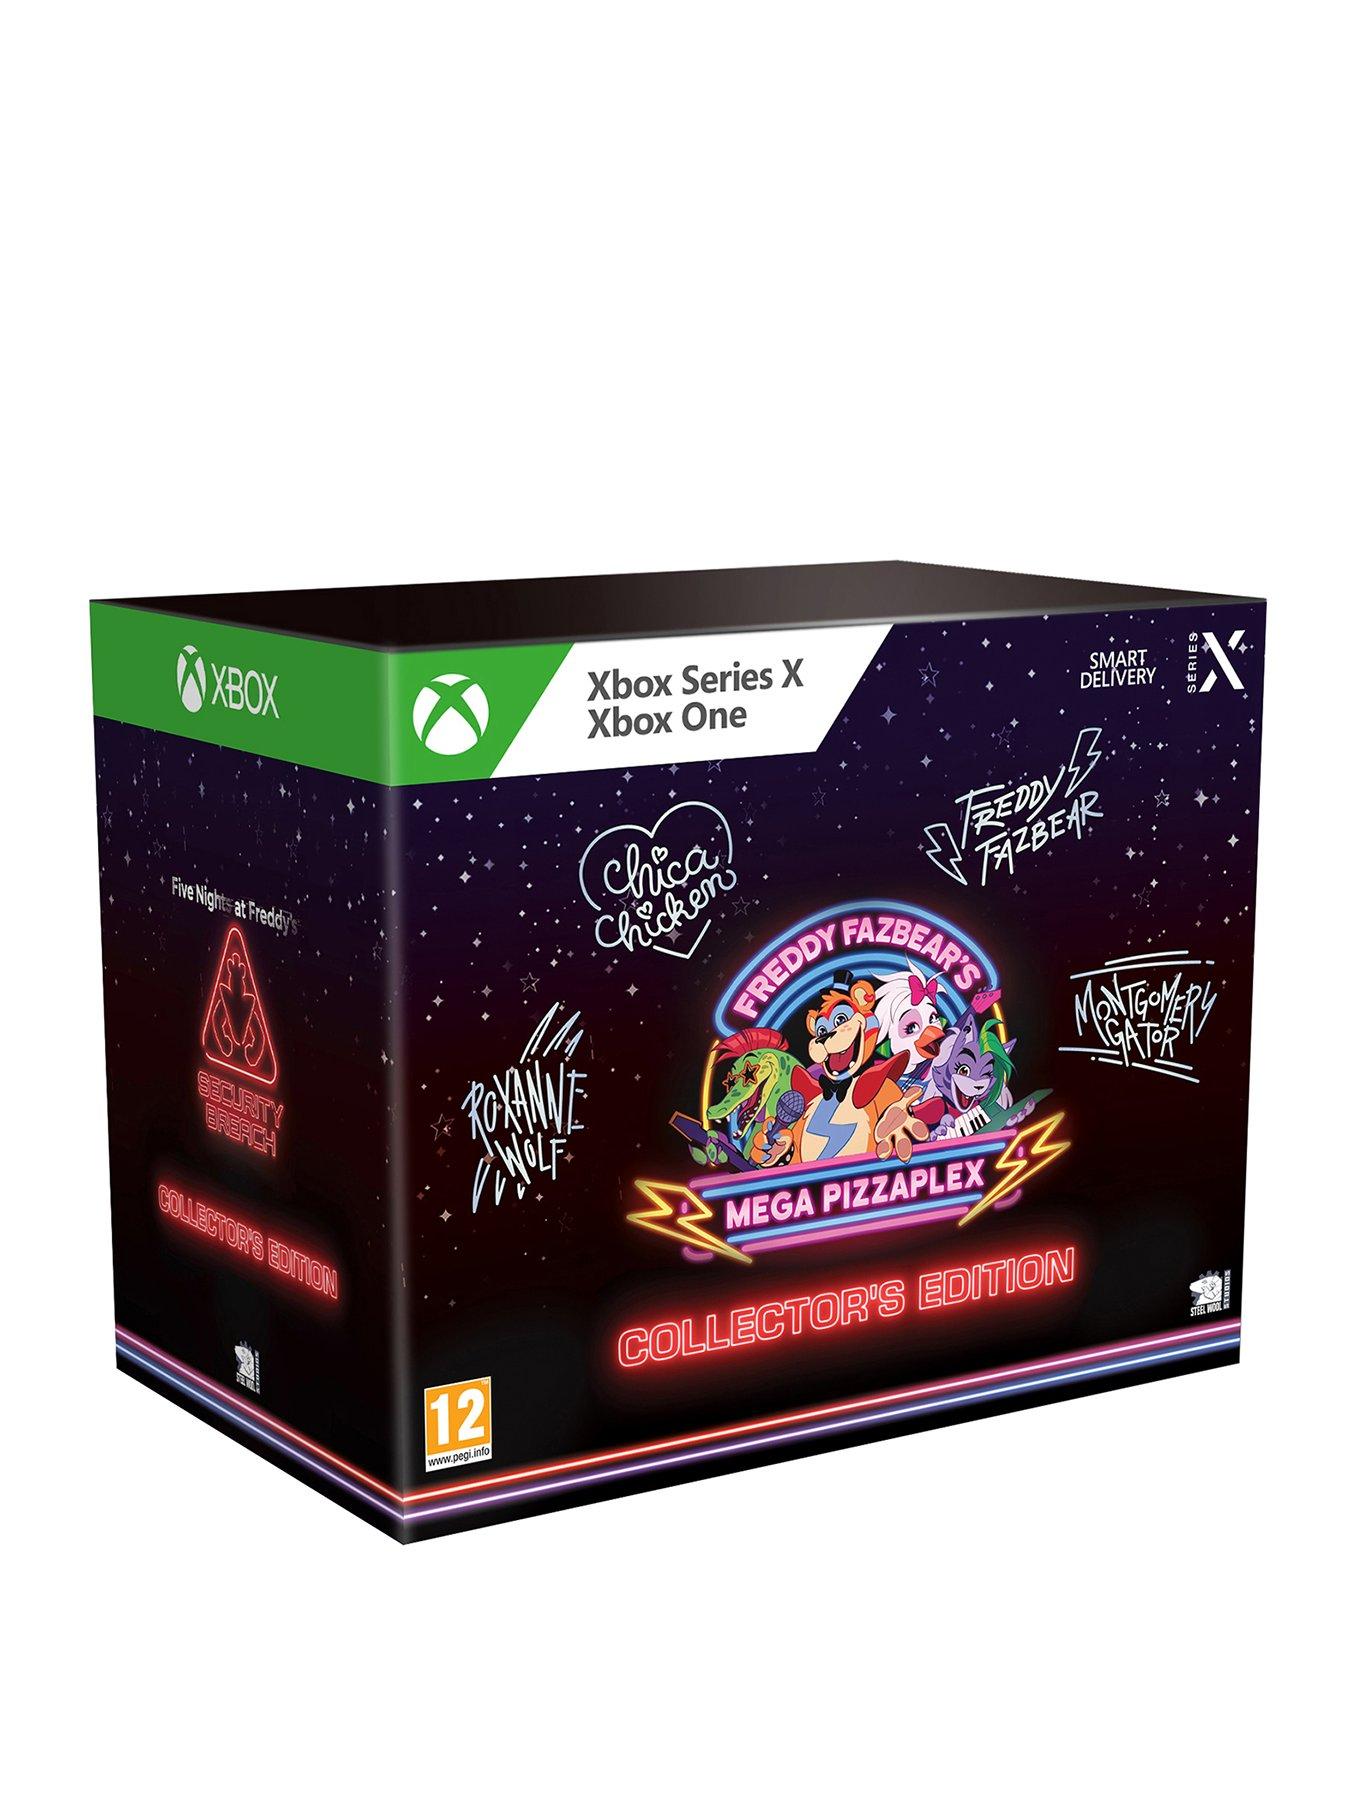 Buy Five Nights at Freddy's: Security Breach (Xbox Series X/S